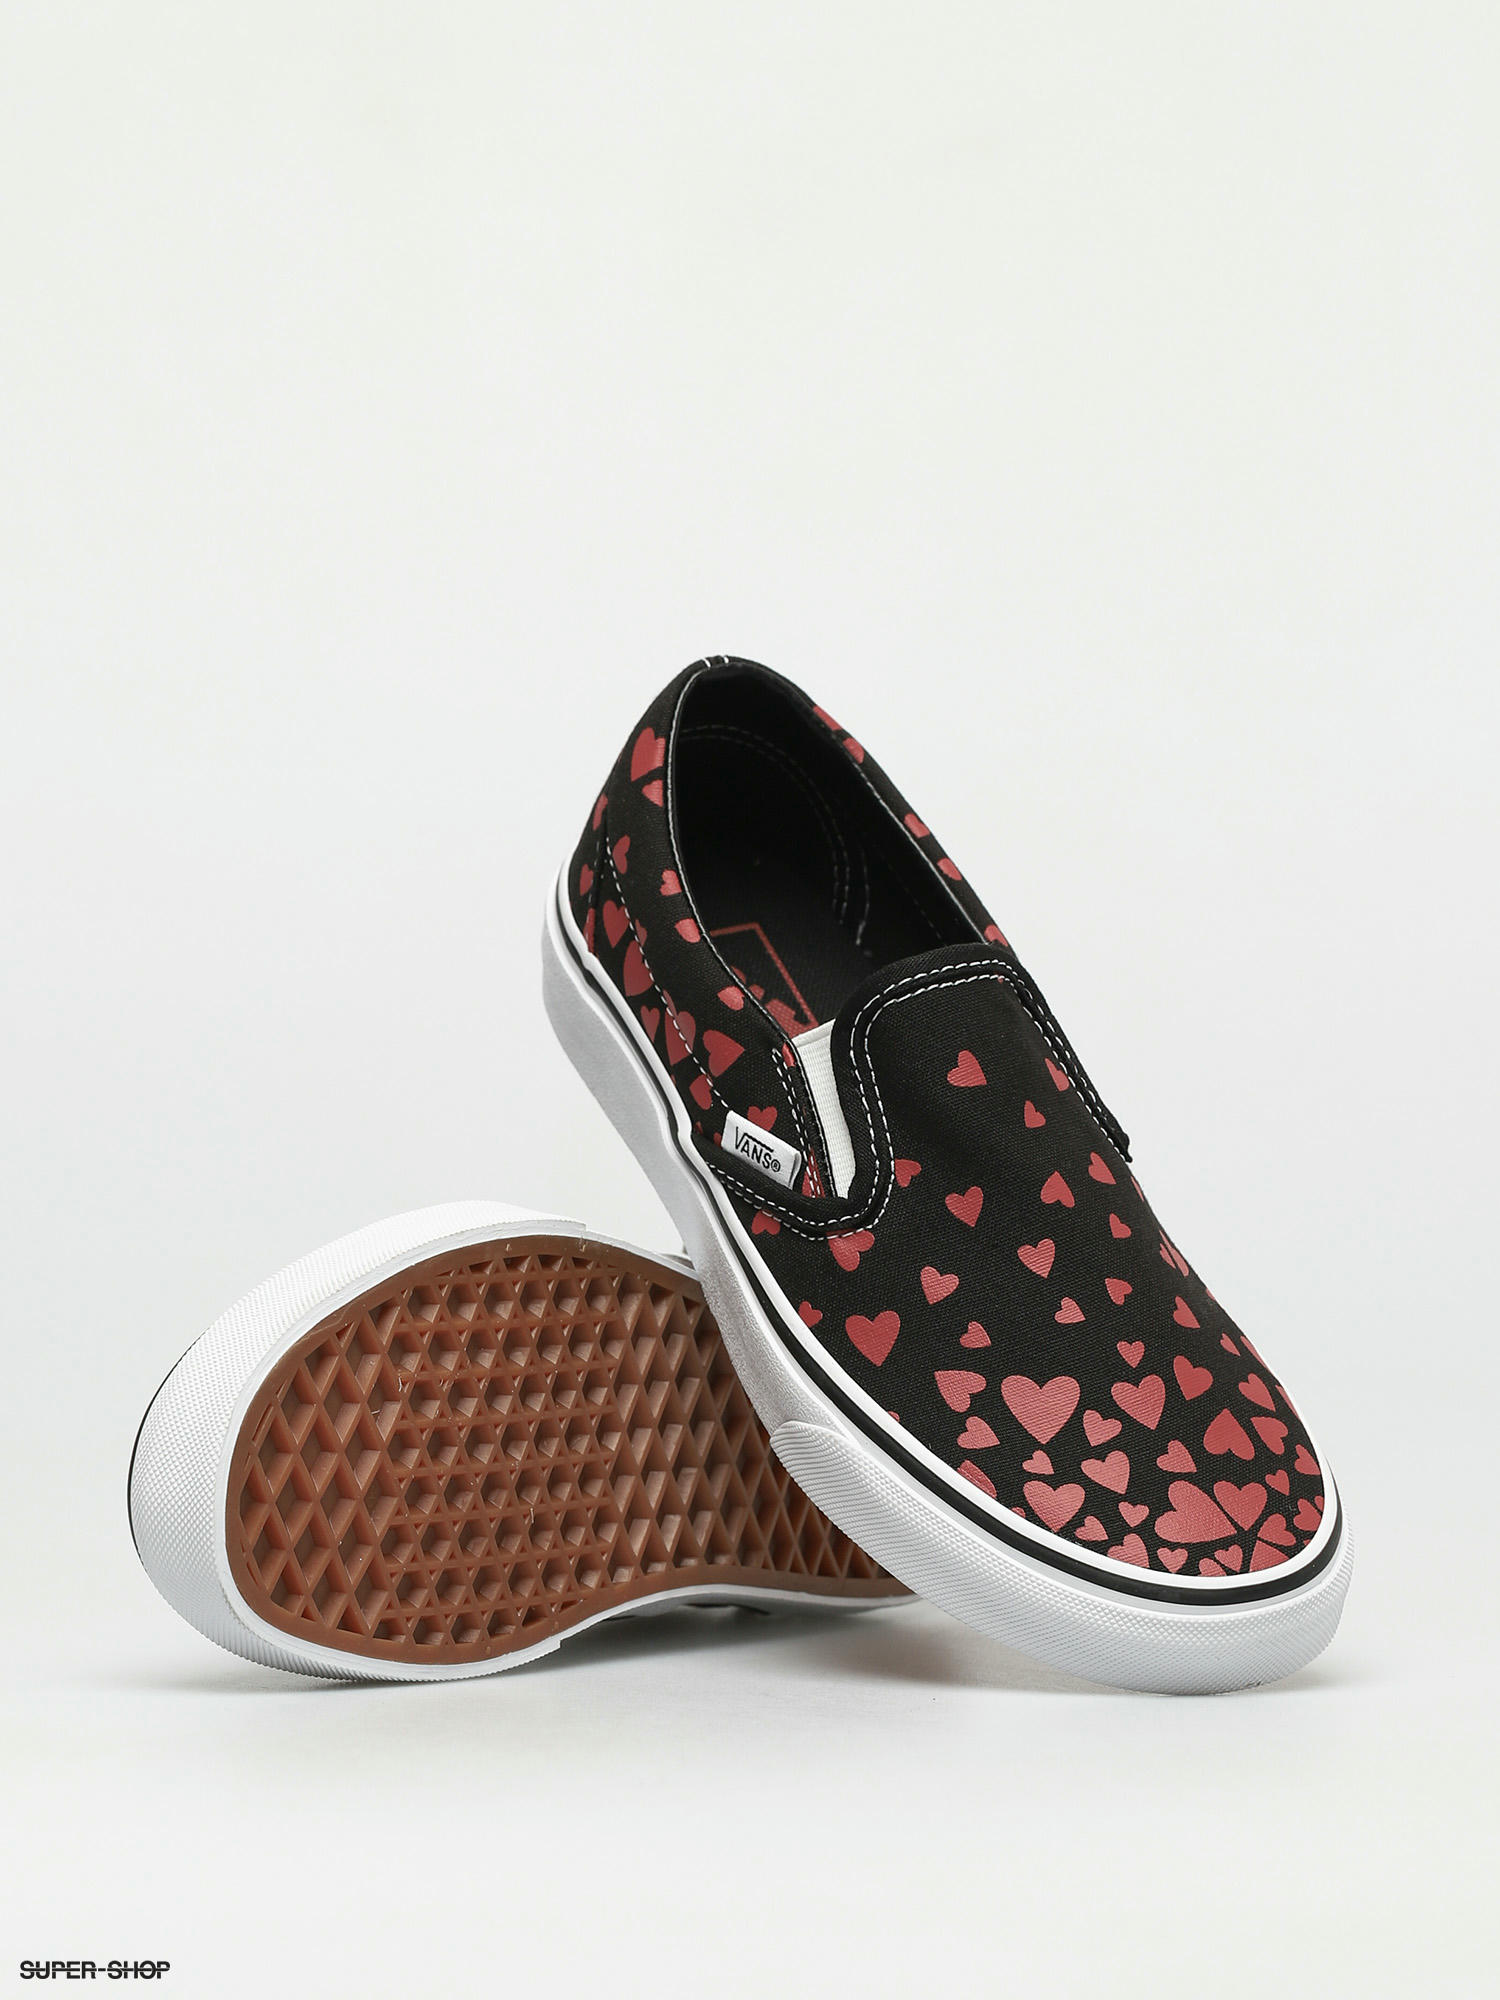 Vans Classic Slip On Shoes hearts black/racing red)